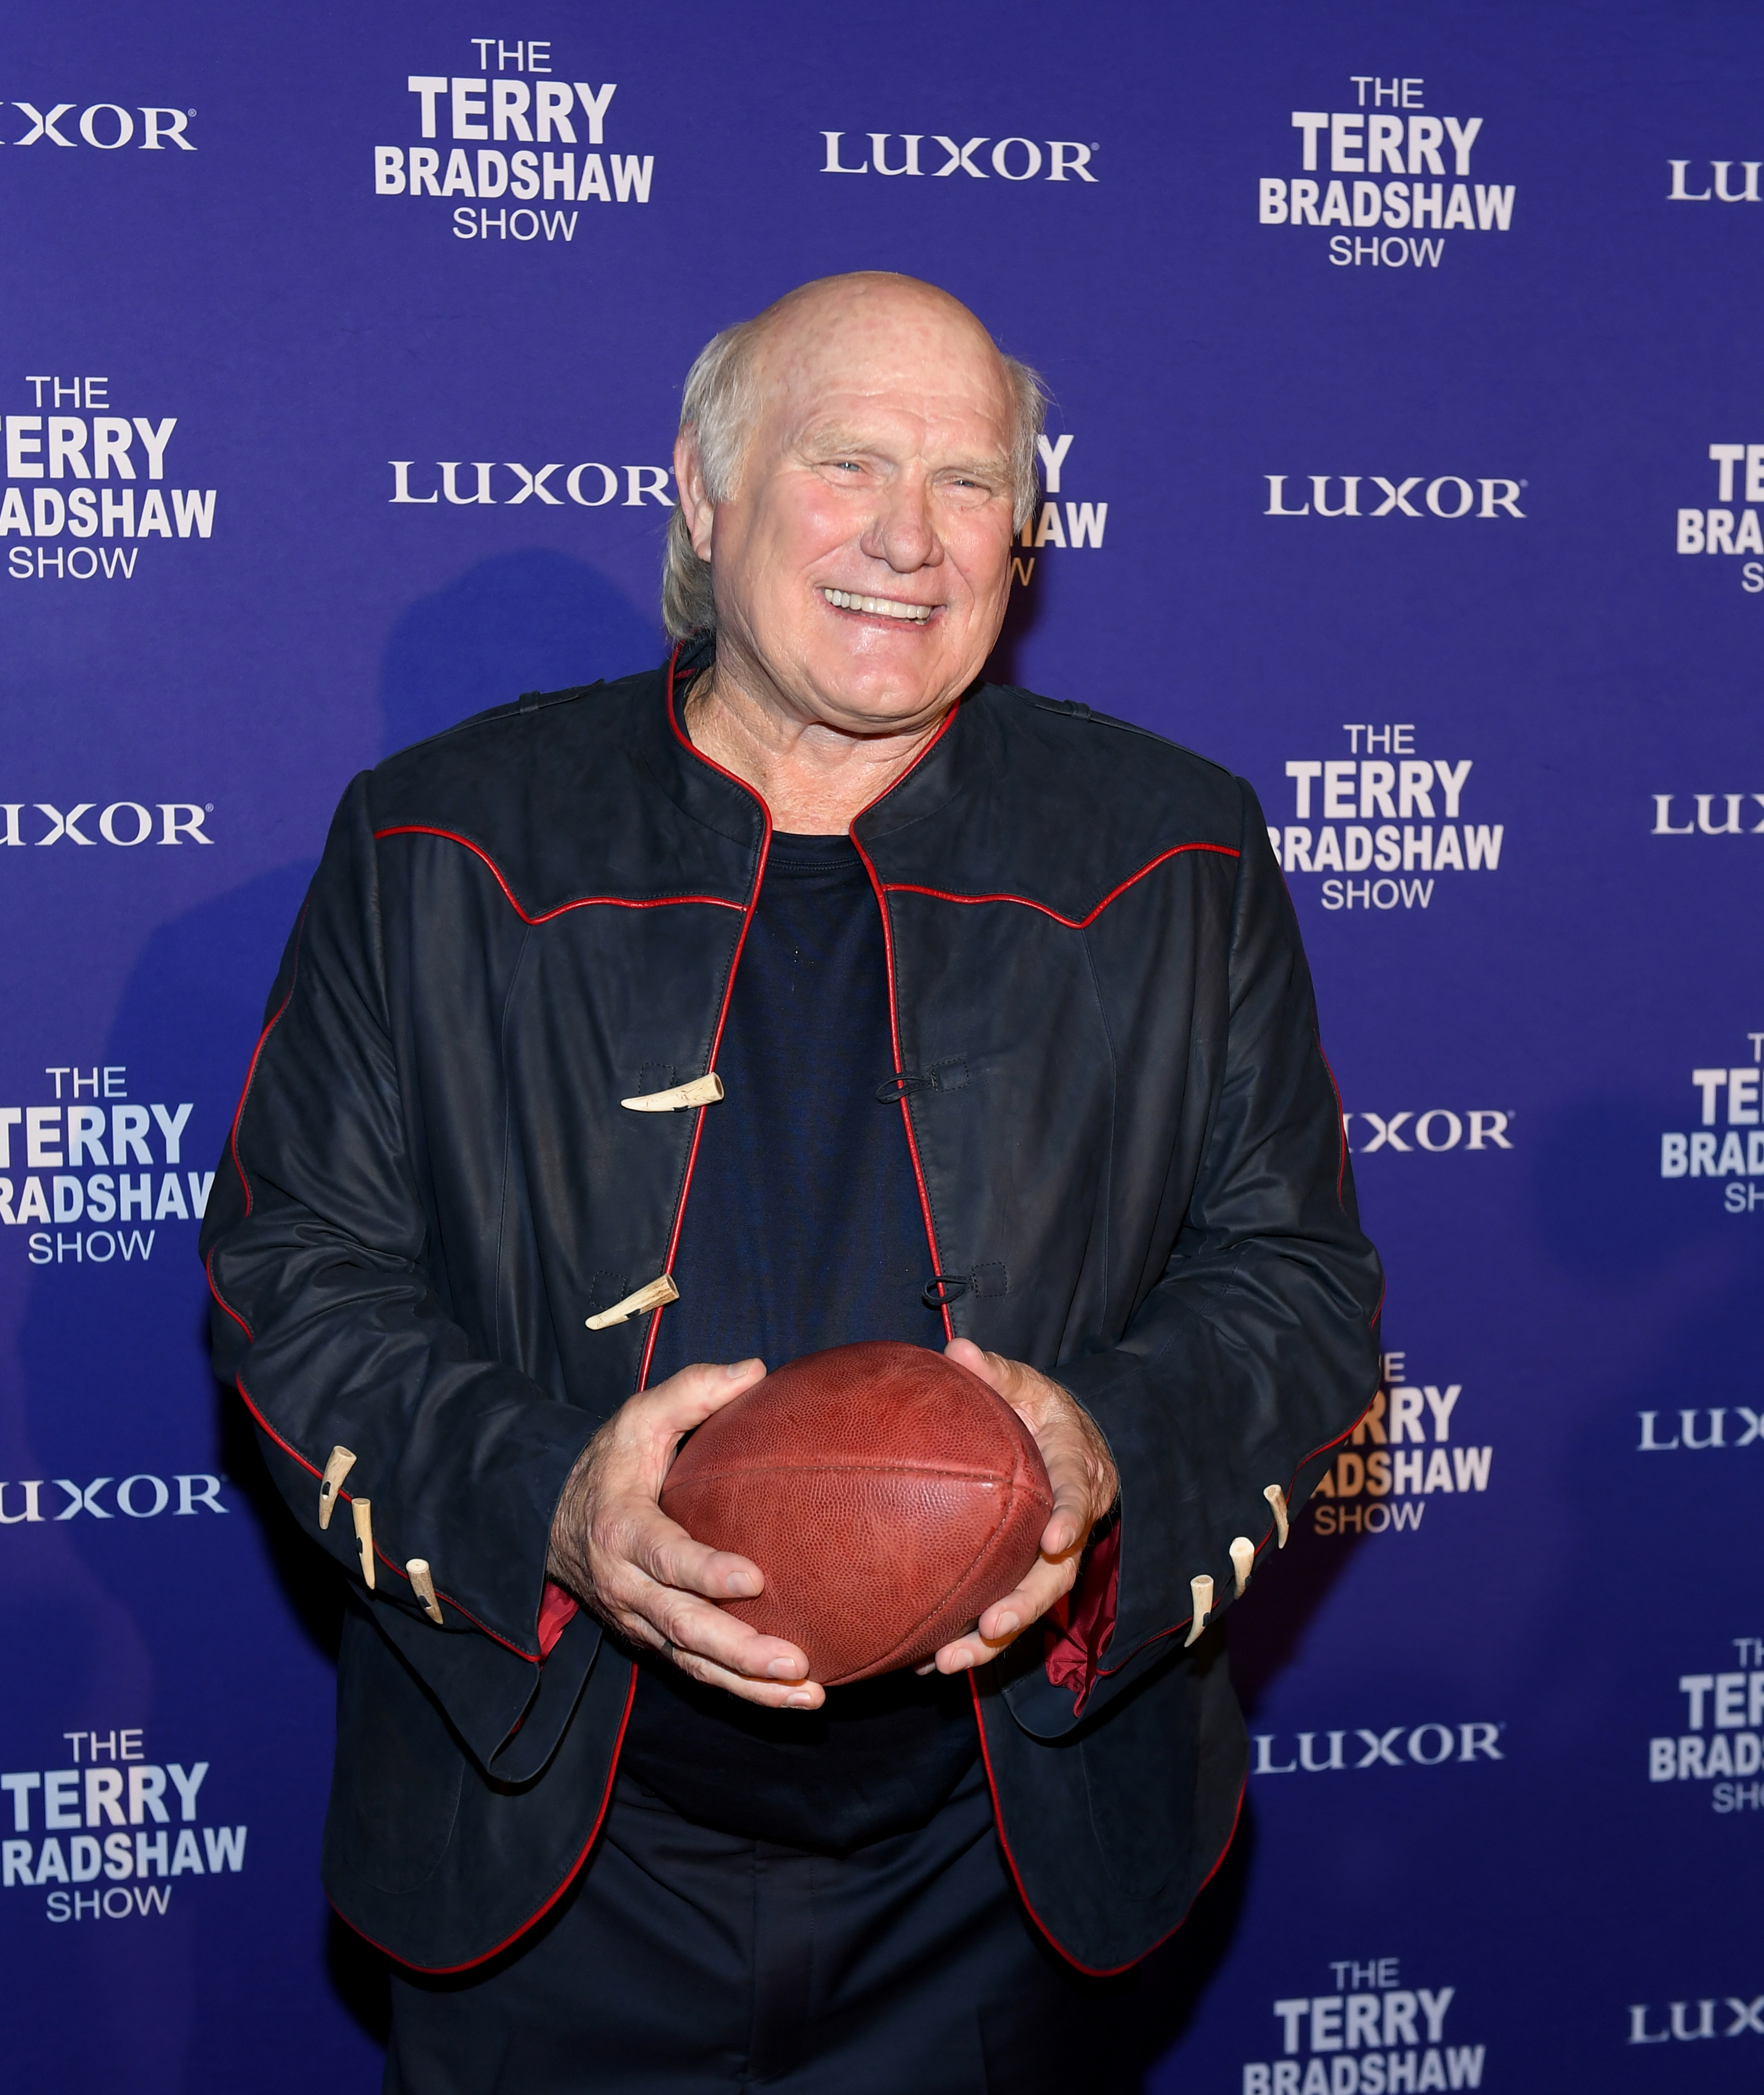 Terry Bradshaw attends the premiere of his show "The Terry Bradshaw Show" at Luxor Hotel and Casino on August 1, 2019, in Las Vegas, Nevada. | Source: Getty Images